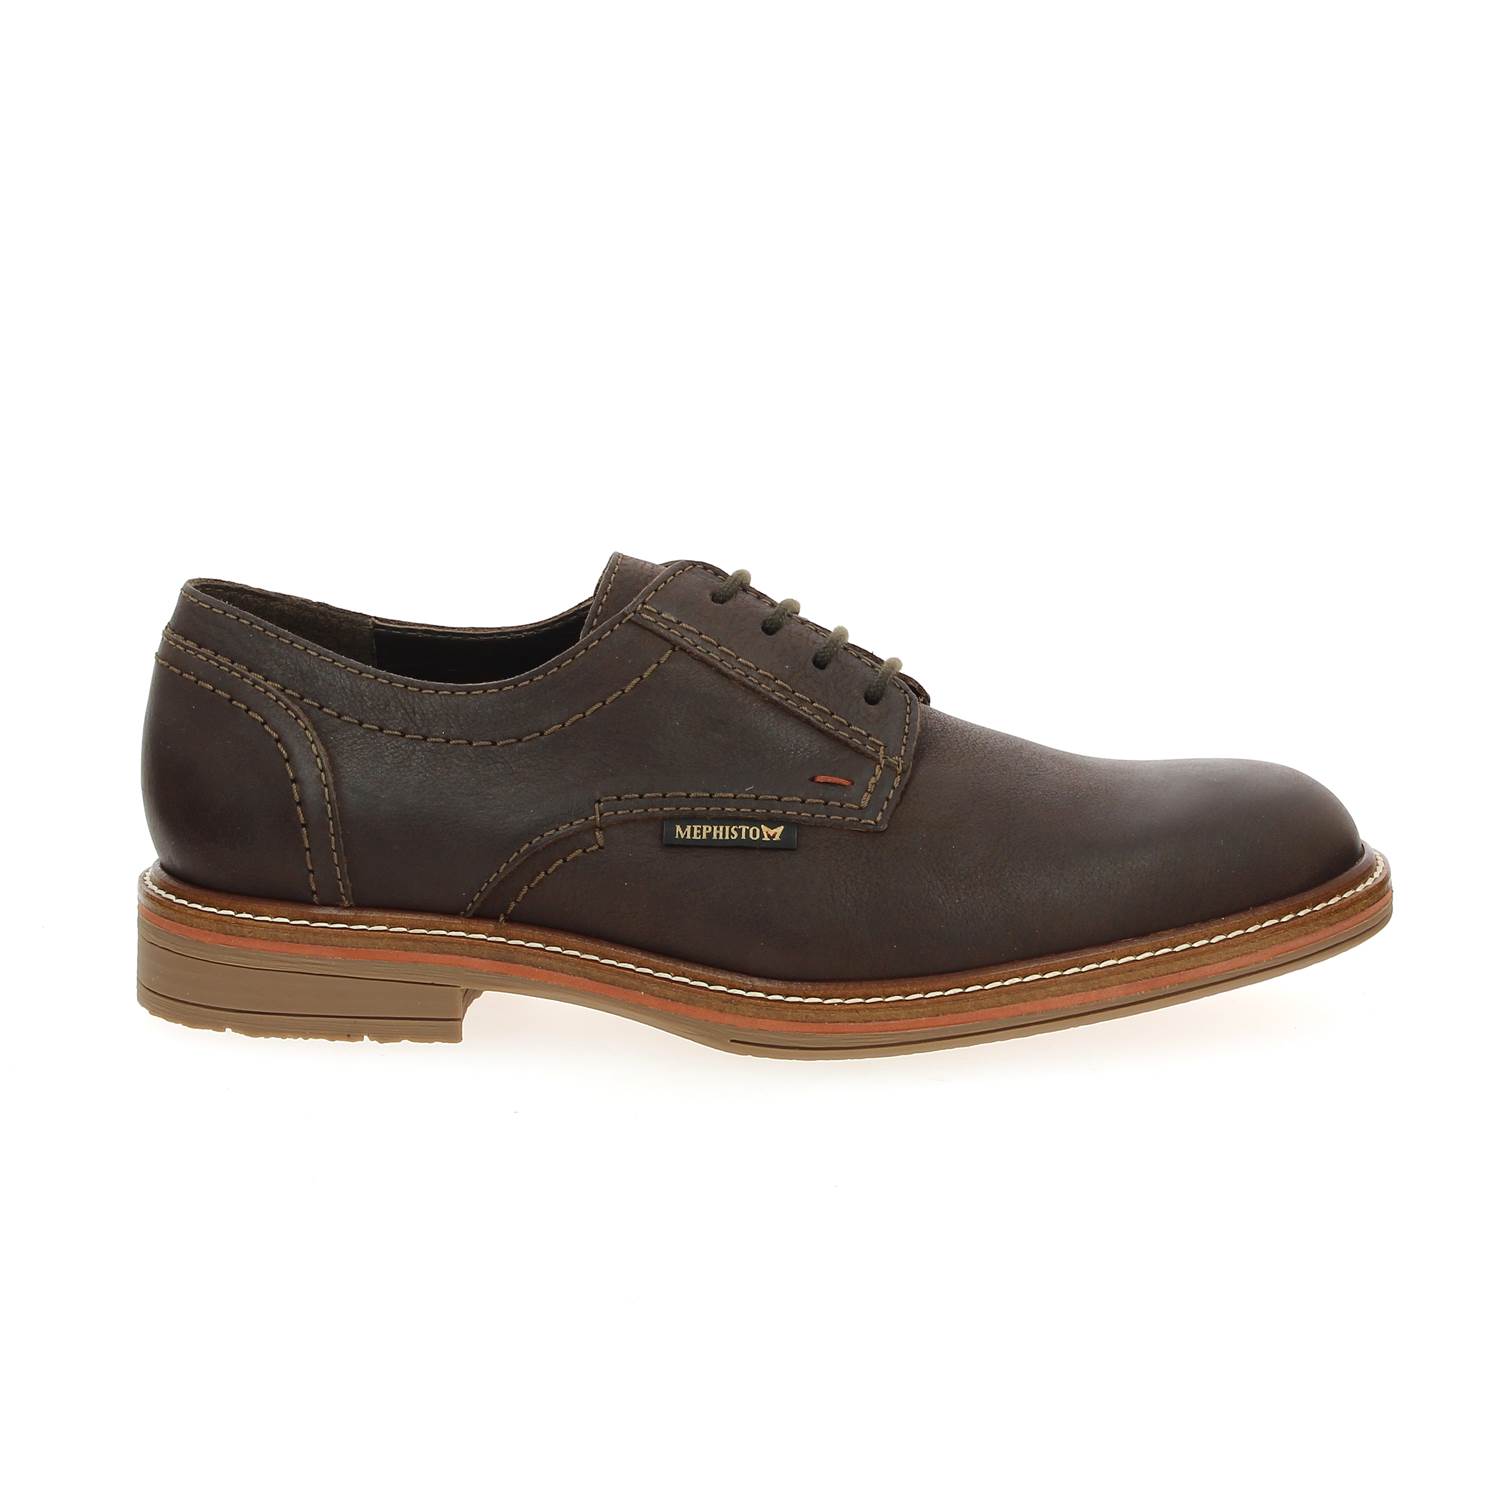 02 - WAINO - MEPHISTO - Chaussures à lacets - Cuir